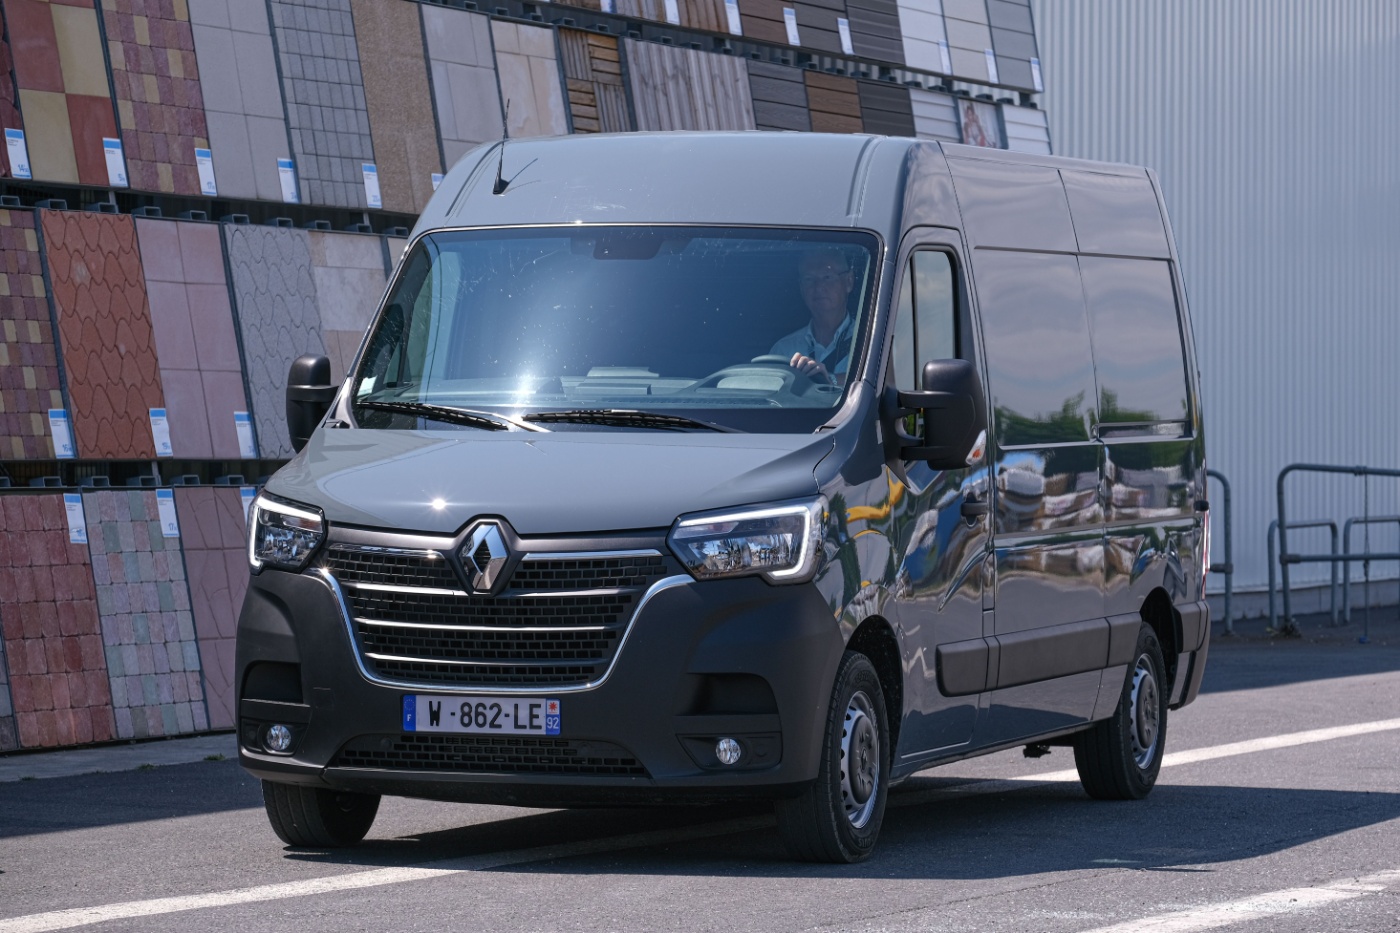 The hydrogen-powered Renault Master E-Tech can cover up to 310 miles. Photo: Renault